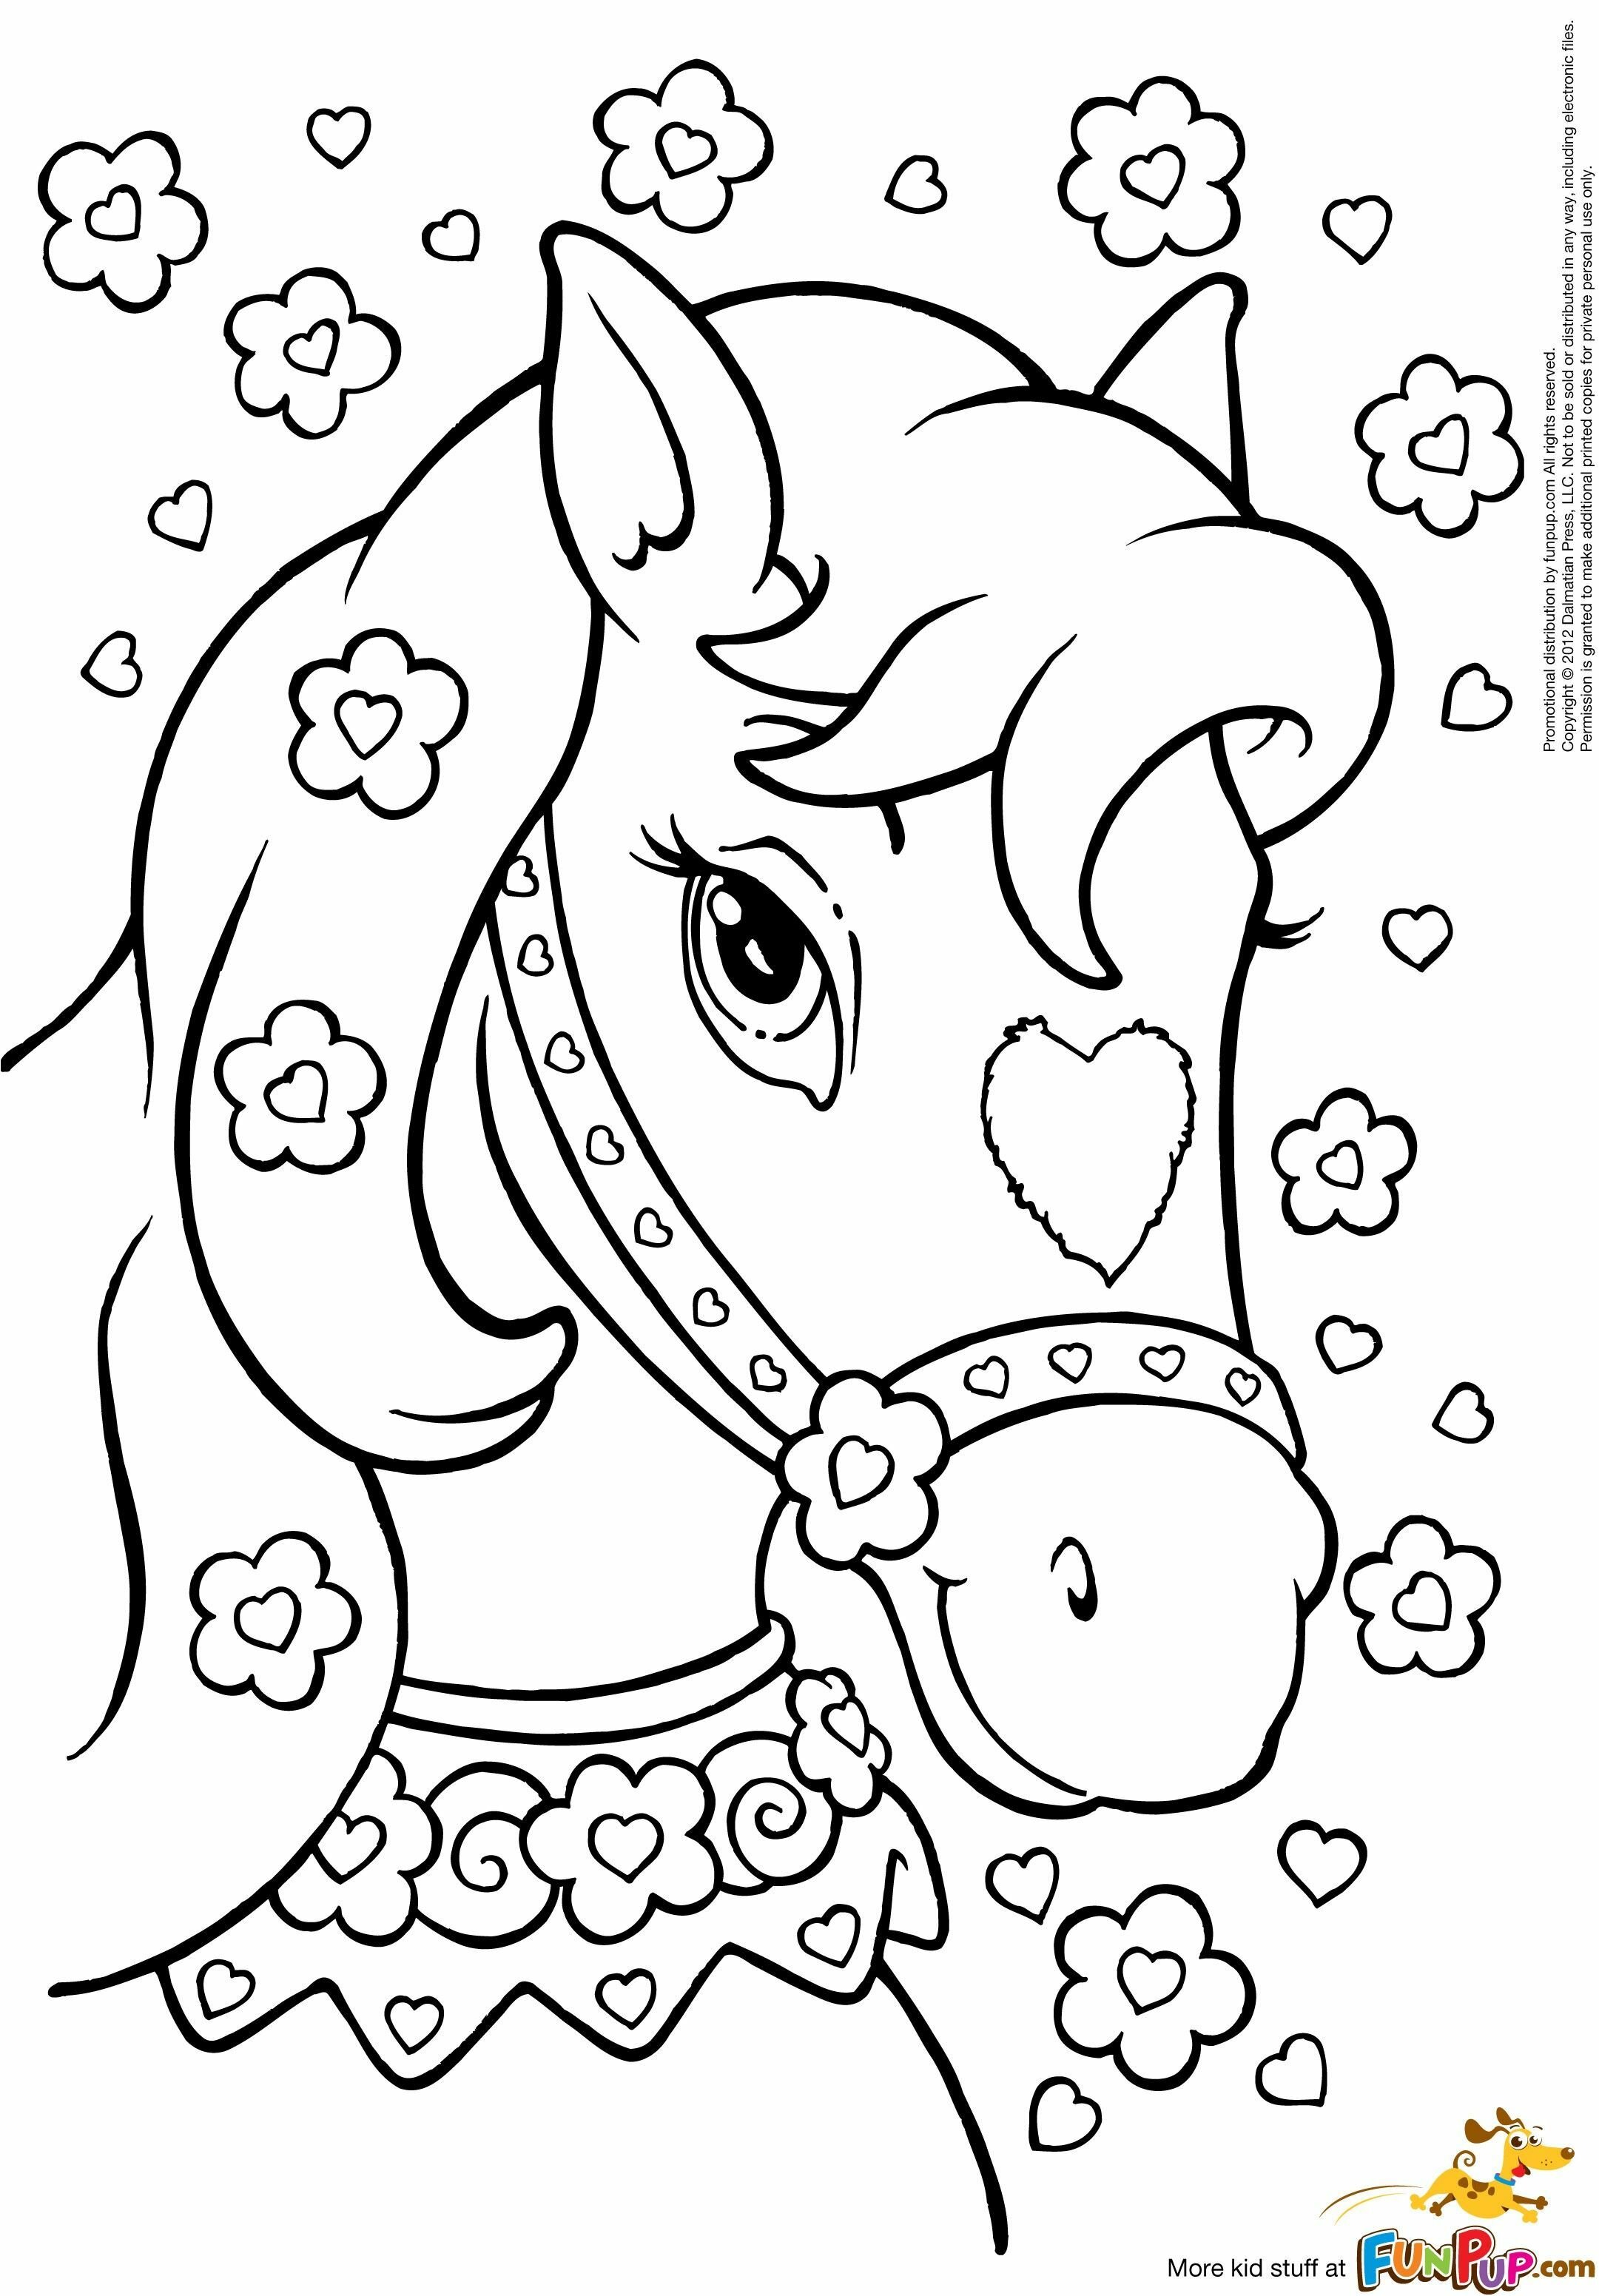 sensational printable princess coloring pages coloring pages for kids kids stylish architecture free printable coloring pages for children 